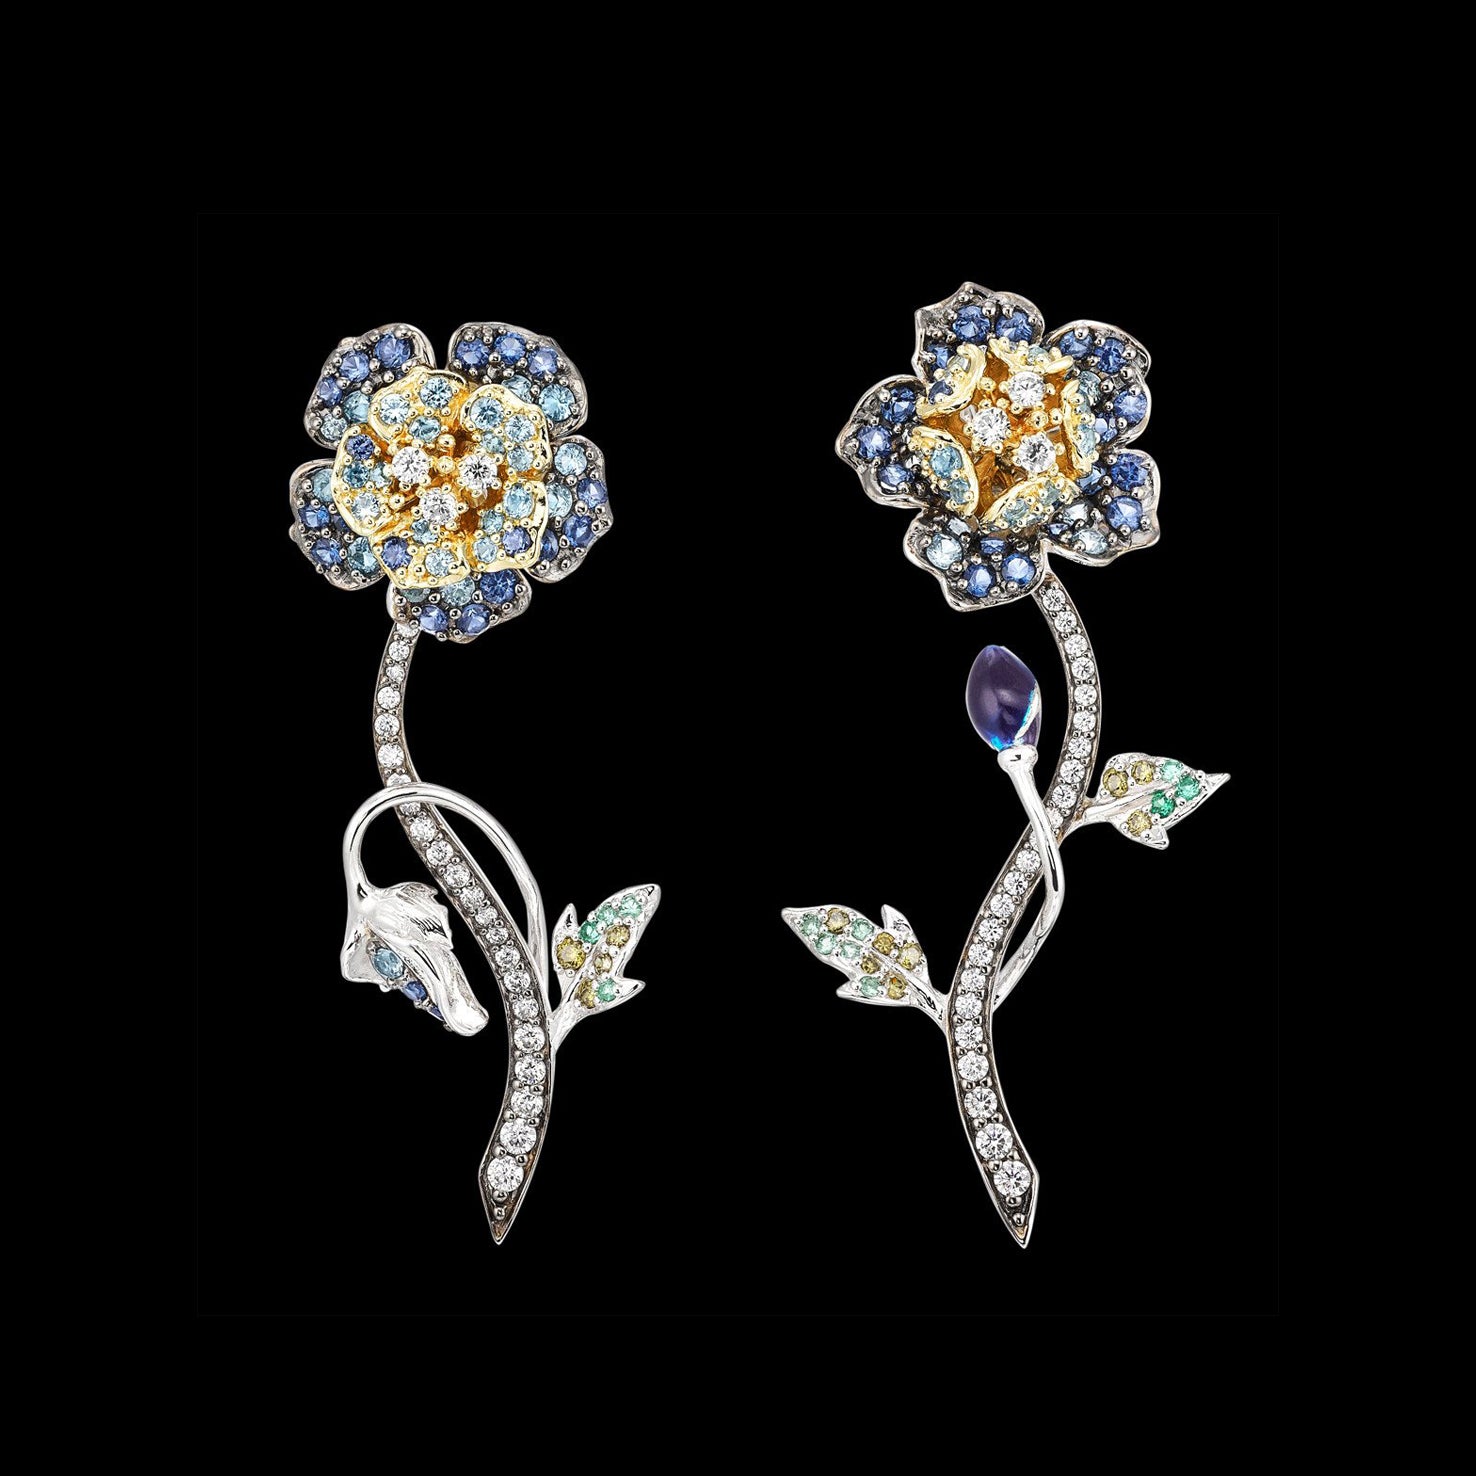 Blue Geranium Earrings, Earring, Anabela Chan Joaillerie - Fine jewelry with laboratory grown and created gemstones hand-crafted in the United Kingdom. Anabela Chan Joaillerie is the first fine jewellery brand in the world to champion laboratory-grown and created gemstones with high jewellery design, artisanal craftsmanship and a focus on ethical and sustainable innovations.